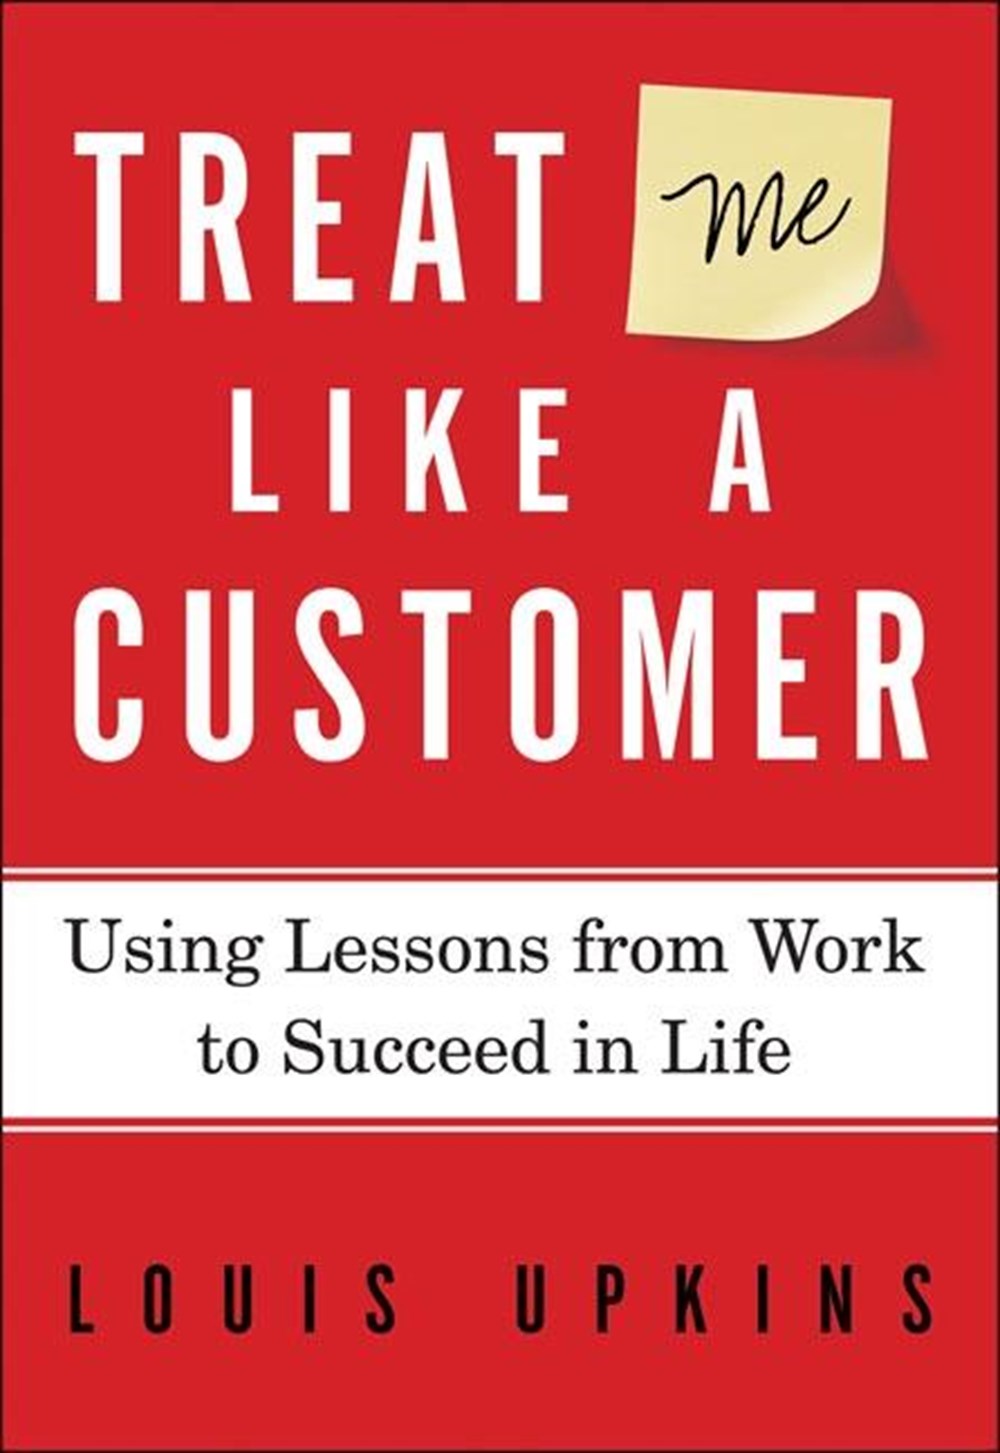 Treat Me Like a Customer Using Lessons from Work to Succeed in Life